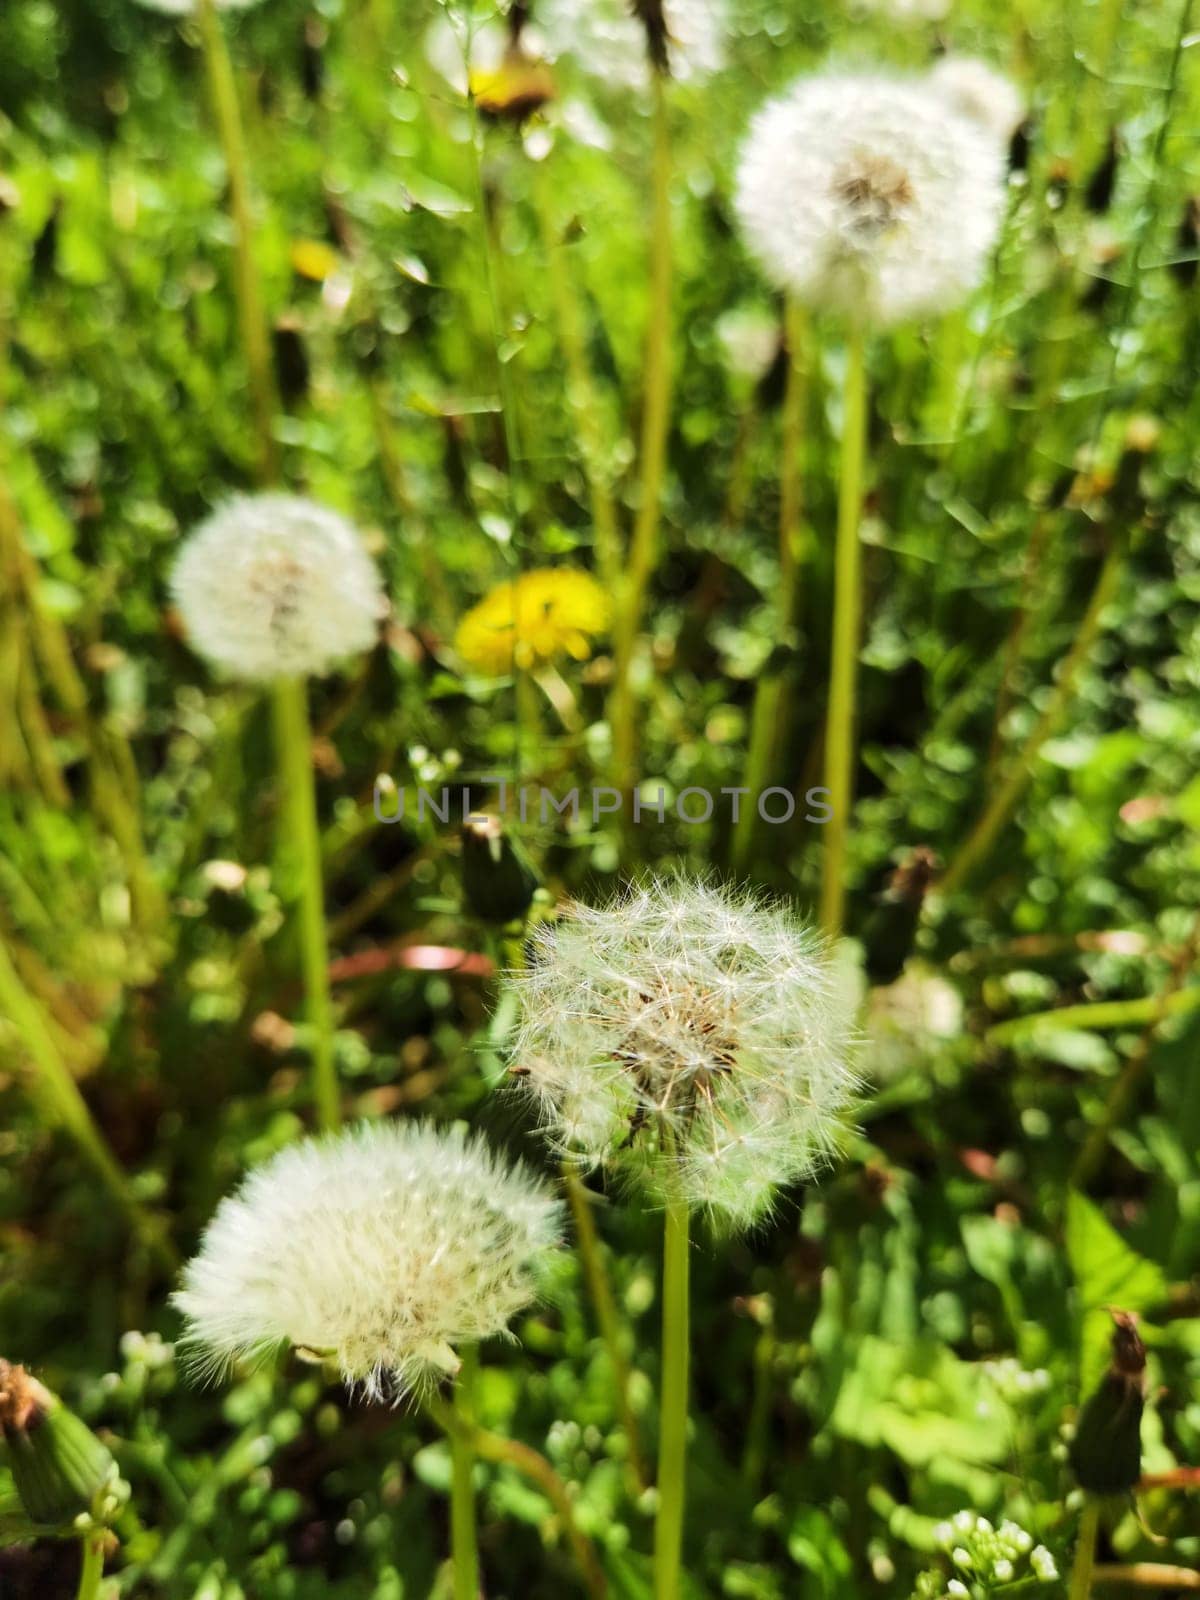 Top view of a common dandelion Taraxacum officinale, a flowering herbaceous perennial plant of the family Asteraceae. The round ball of silver tufted fruits is called a blowball or clock. by sarymsakov